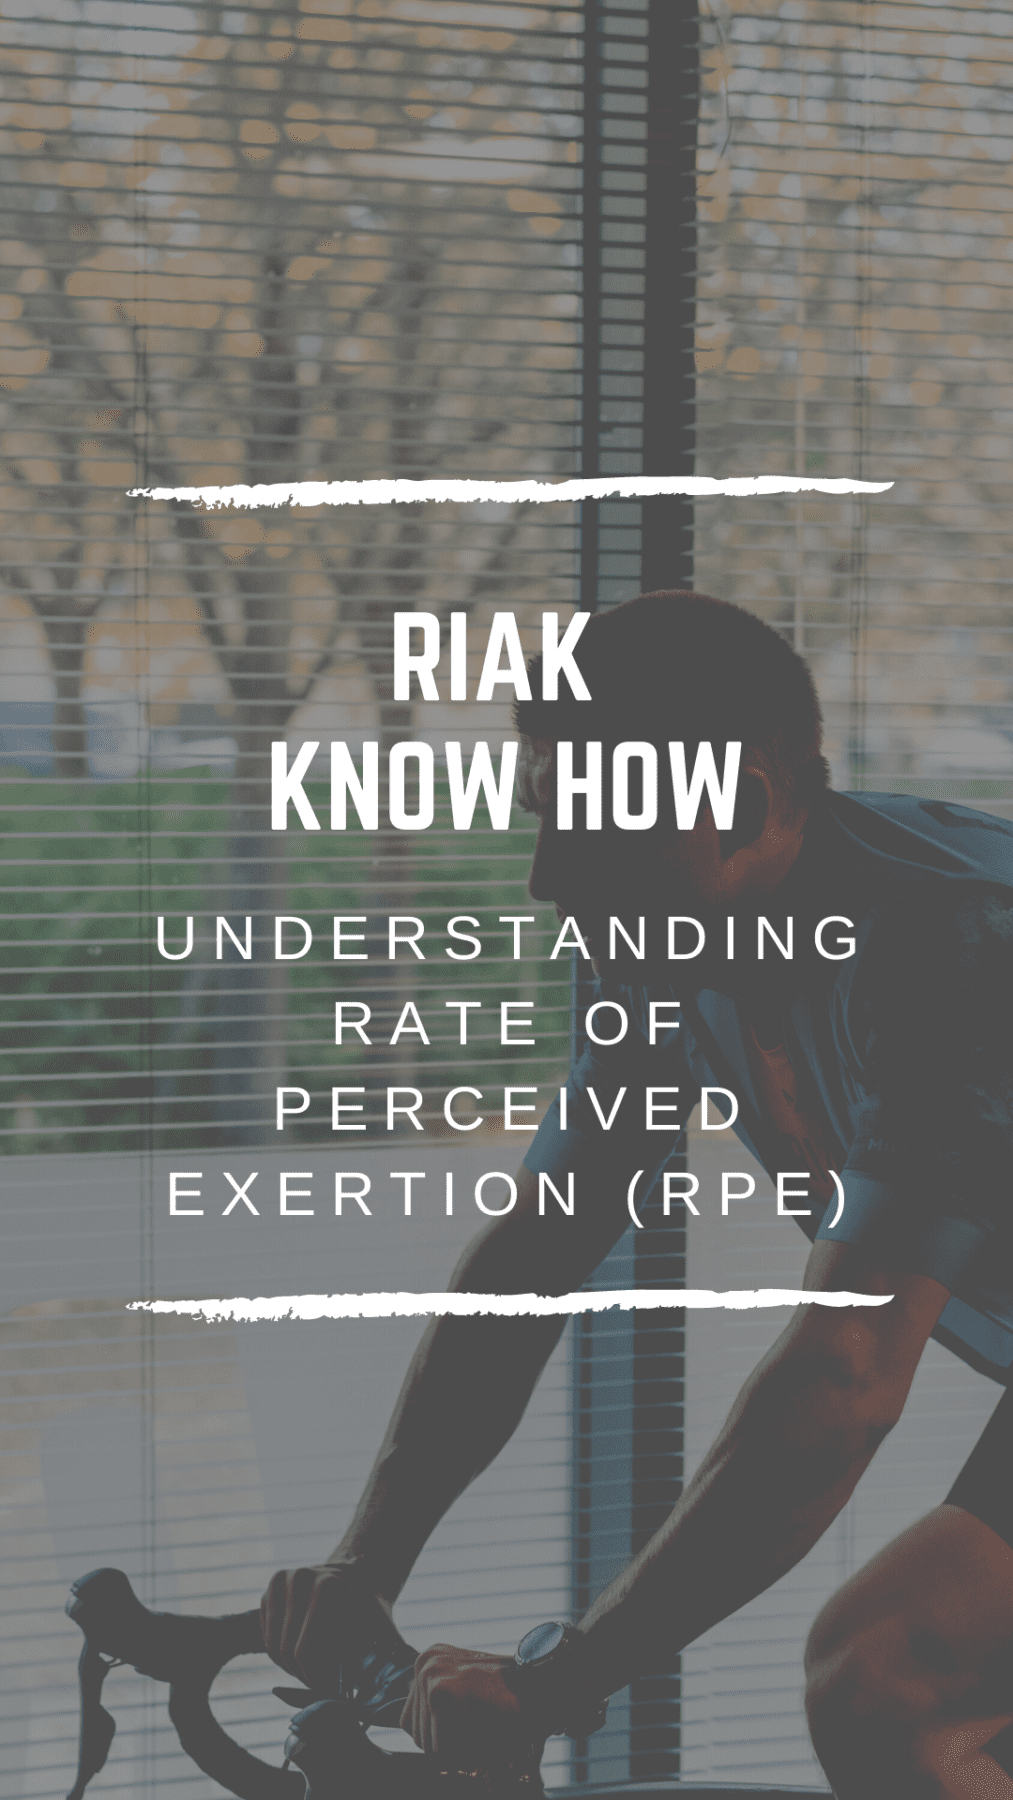 RIAK Know How – Understanding Rate of Perceived Exertion